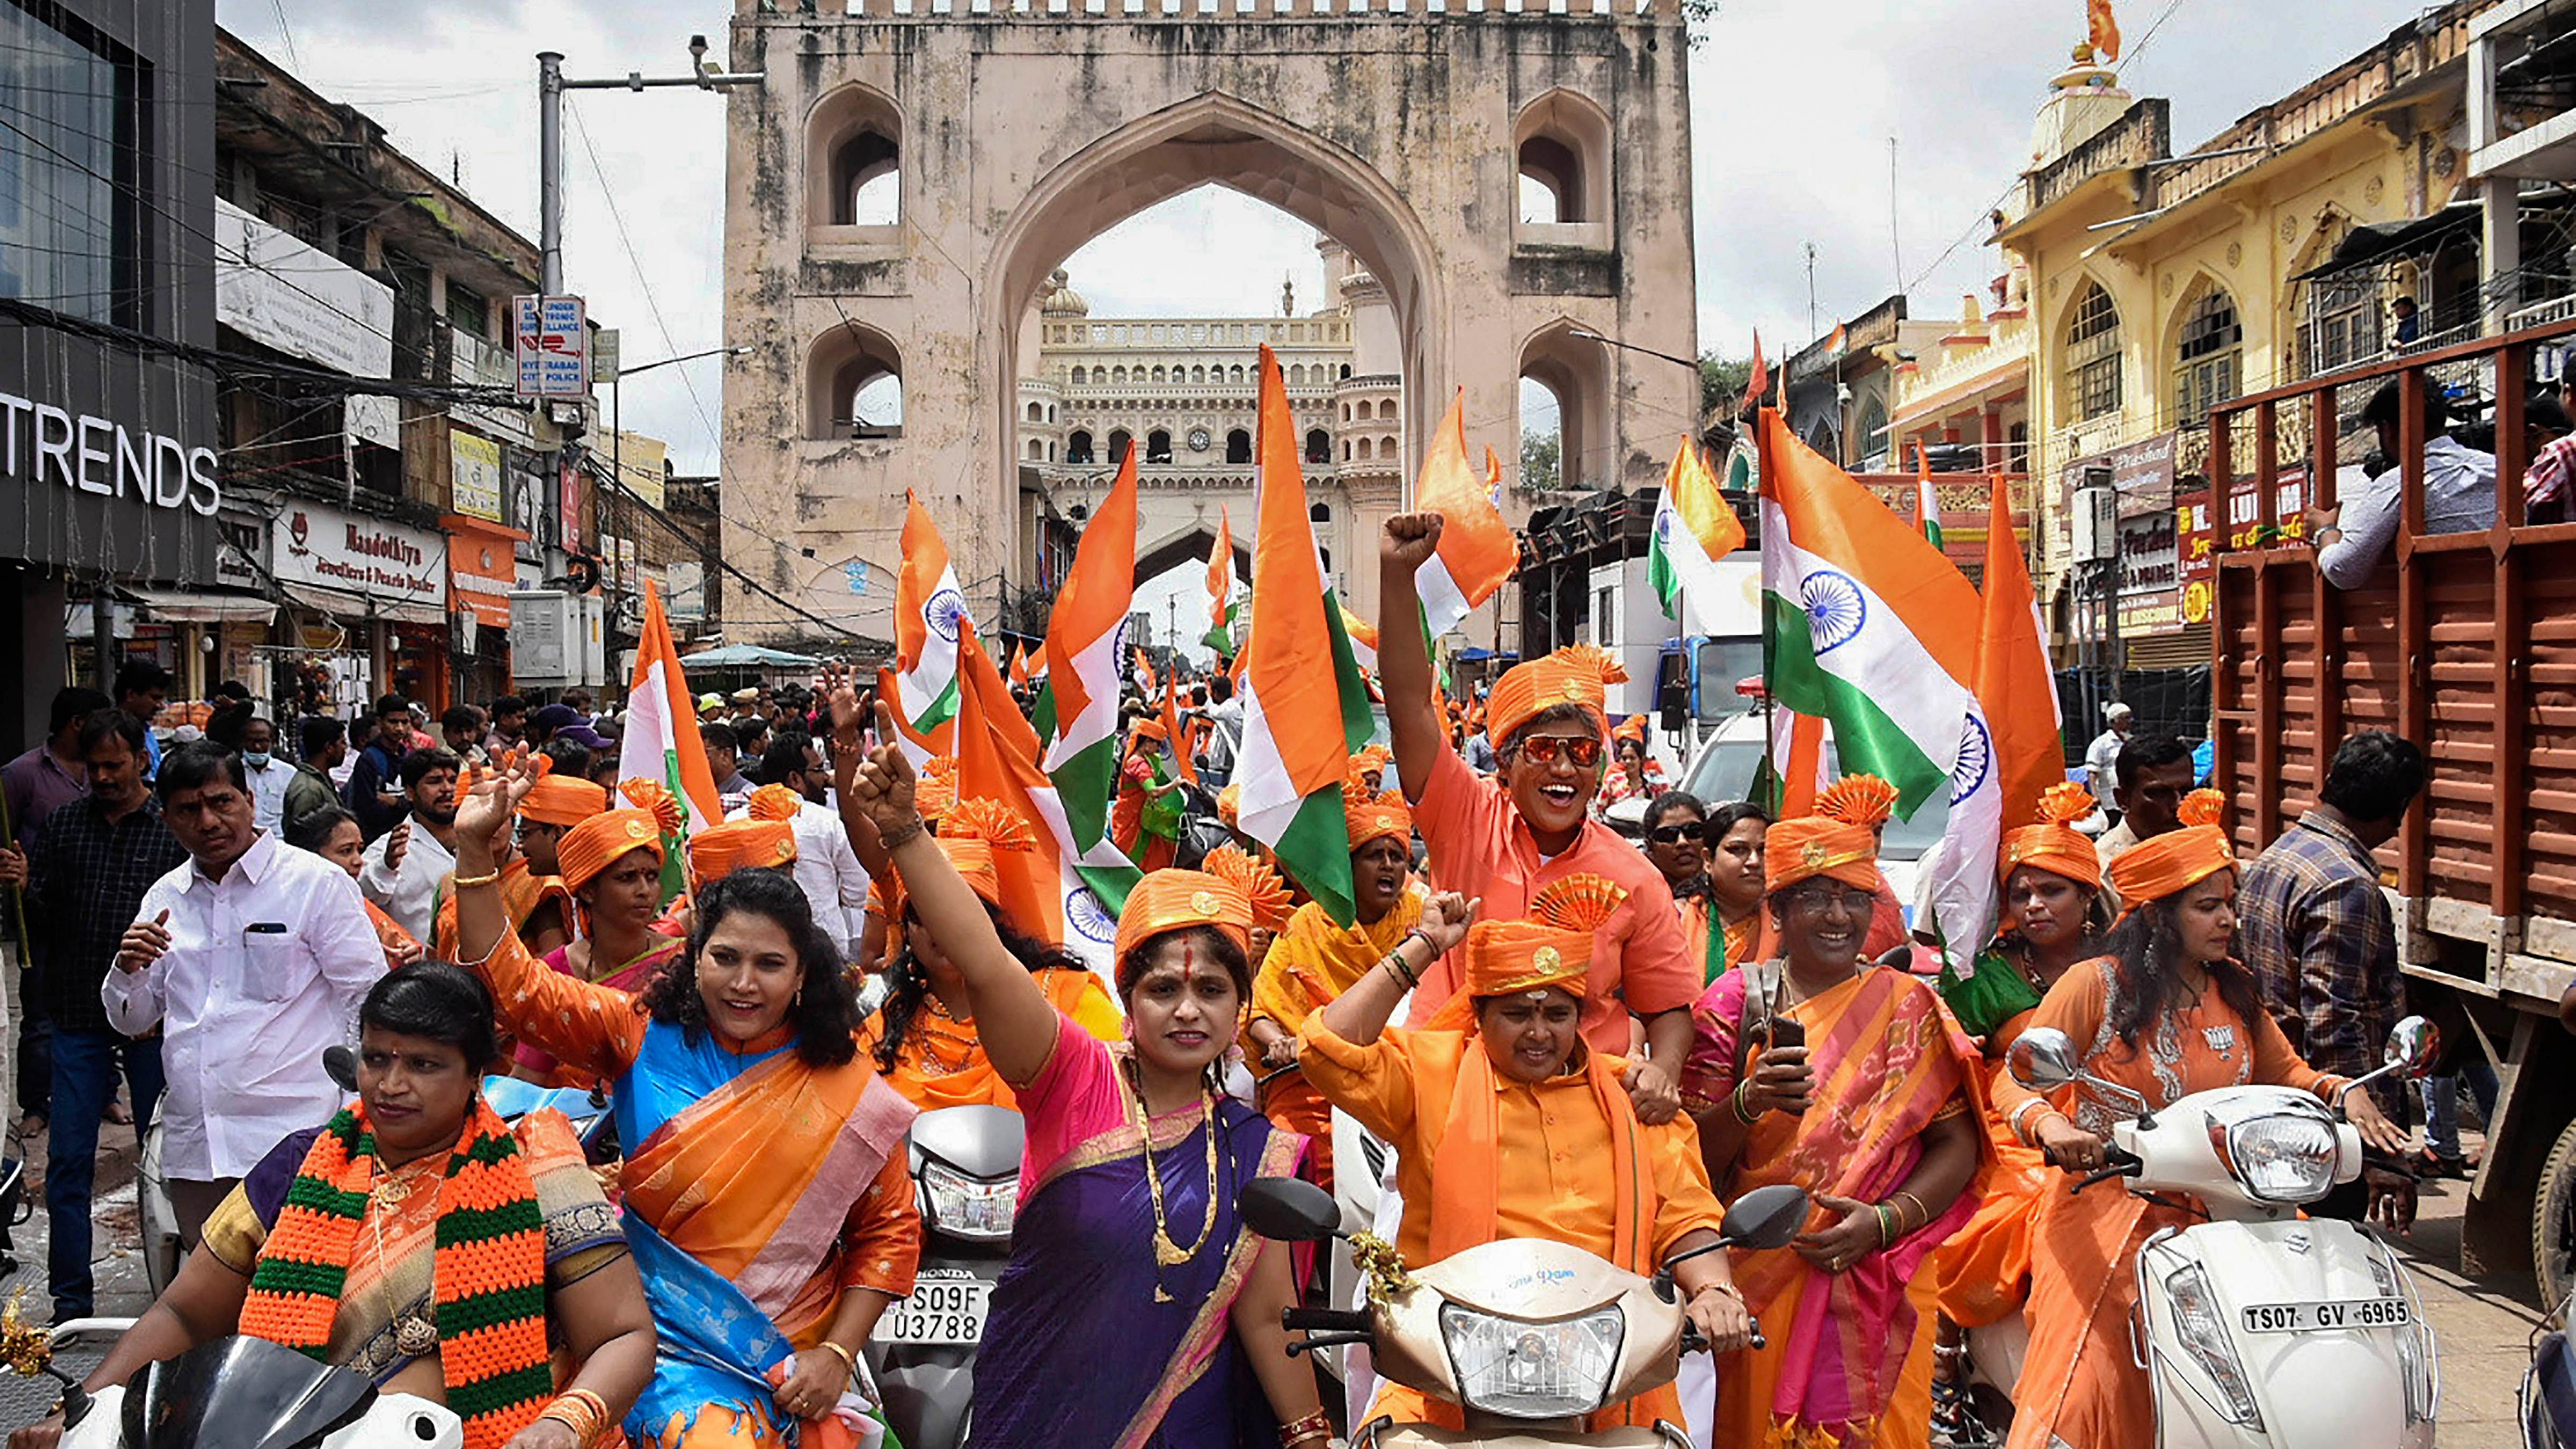 BJP Mahila Morcha activists participate in a bike rally organised as part of the upcoming 'Hyderabad Liberation Day' celebrations, near Charminar in Hyderabad. Credit: PTI File Photo